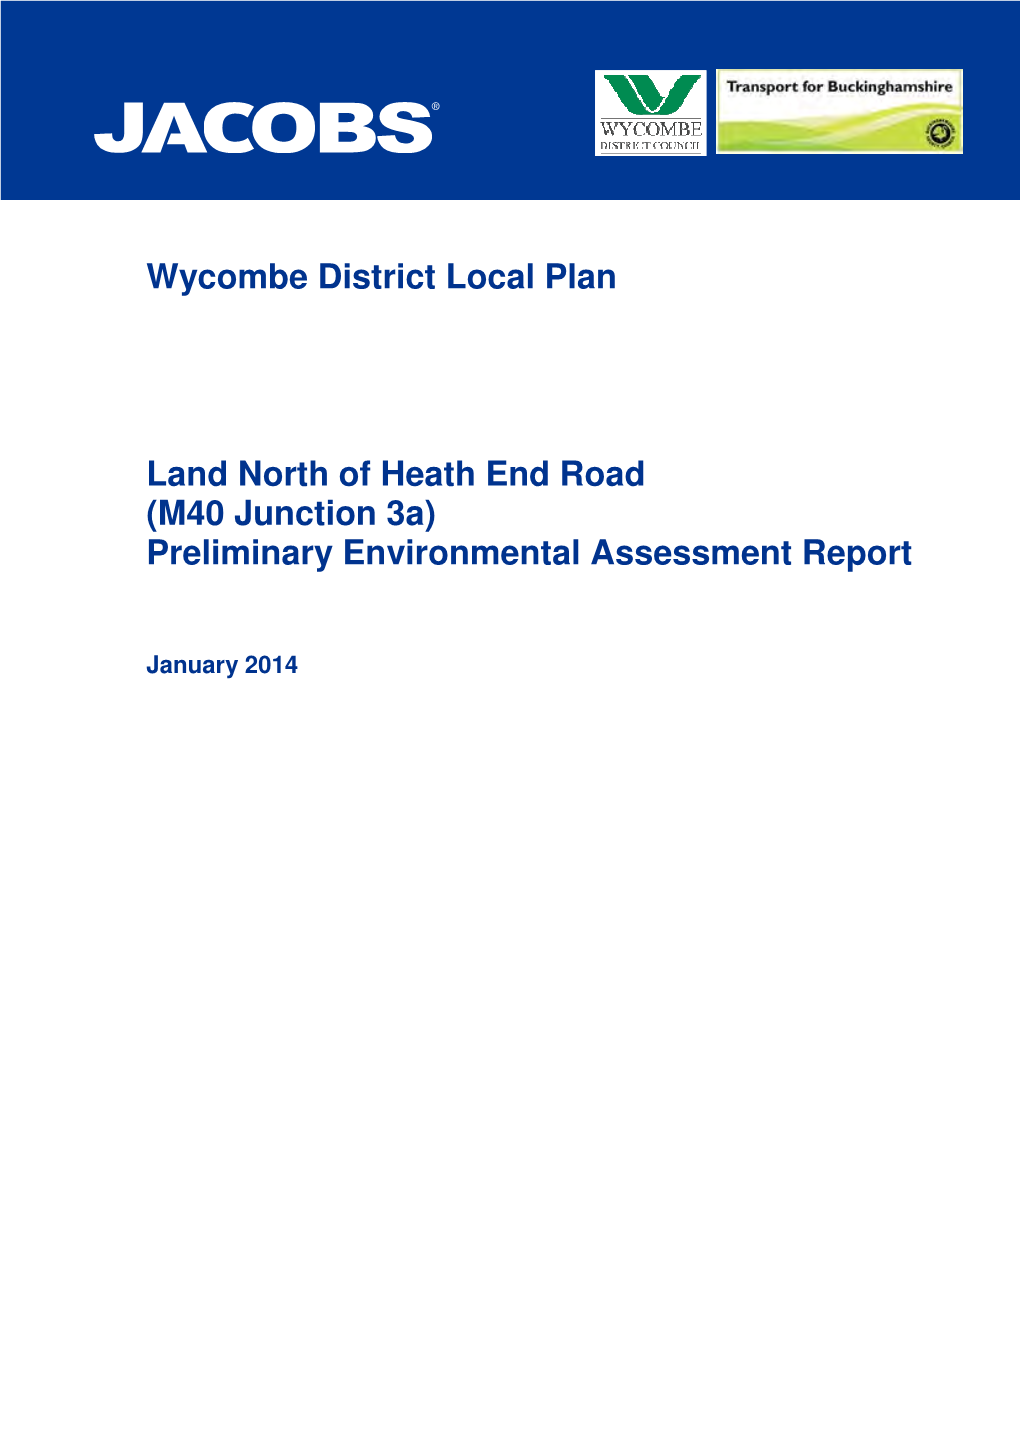 Land North of Heath End Road (M40 Junction 3A) Preliminary Environmental Assessment Report